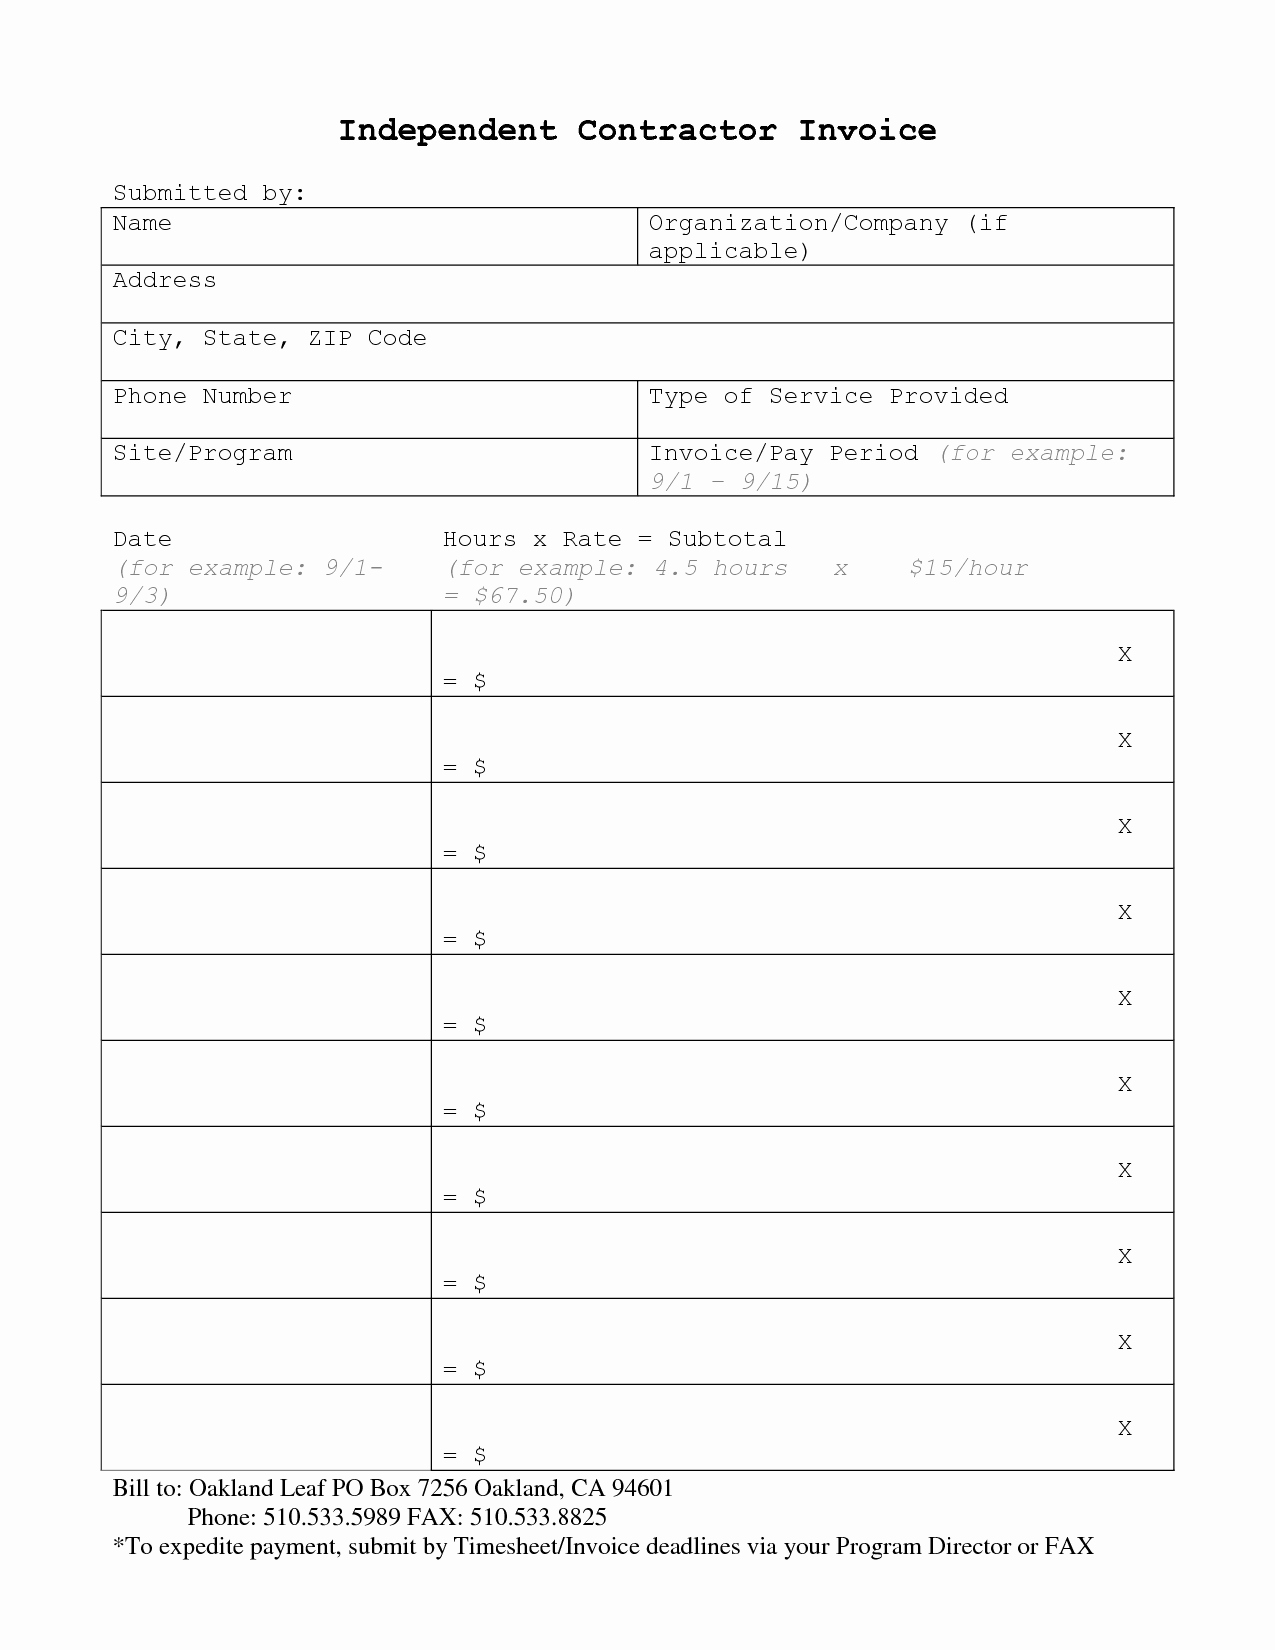 Independent Contractor Invoice Template Pdf New Independent Contractor Invoice Template